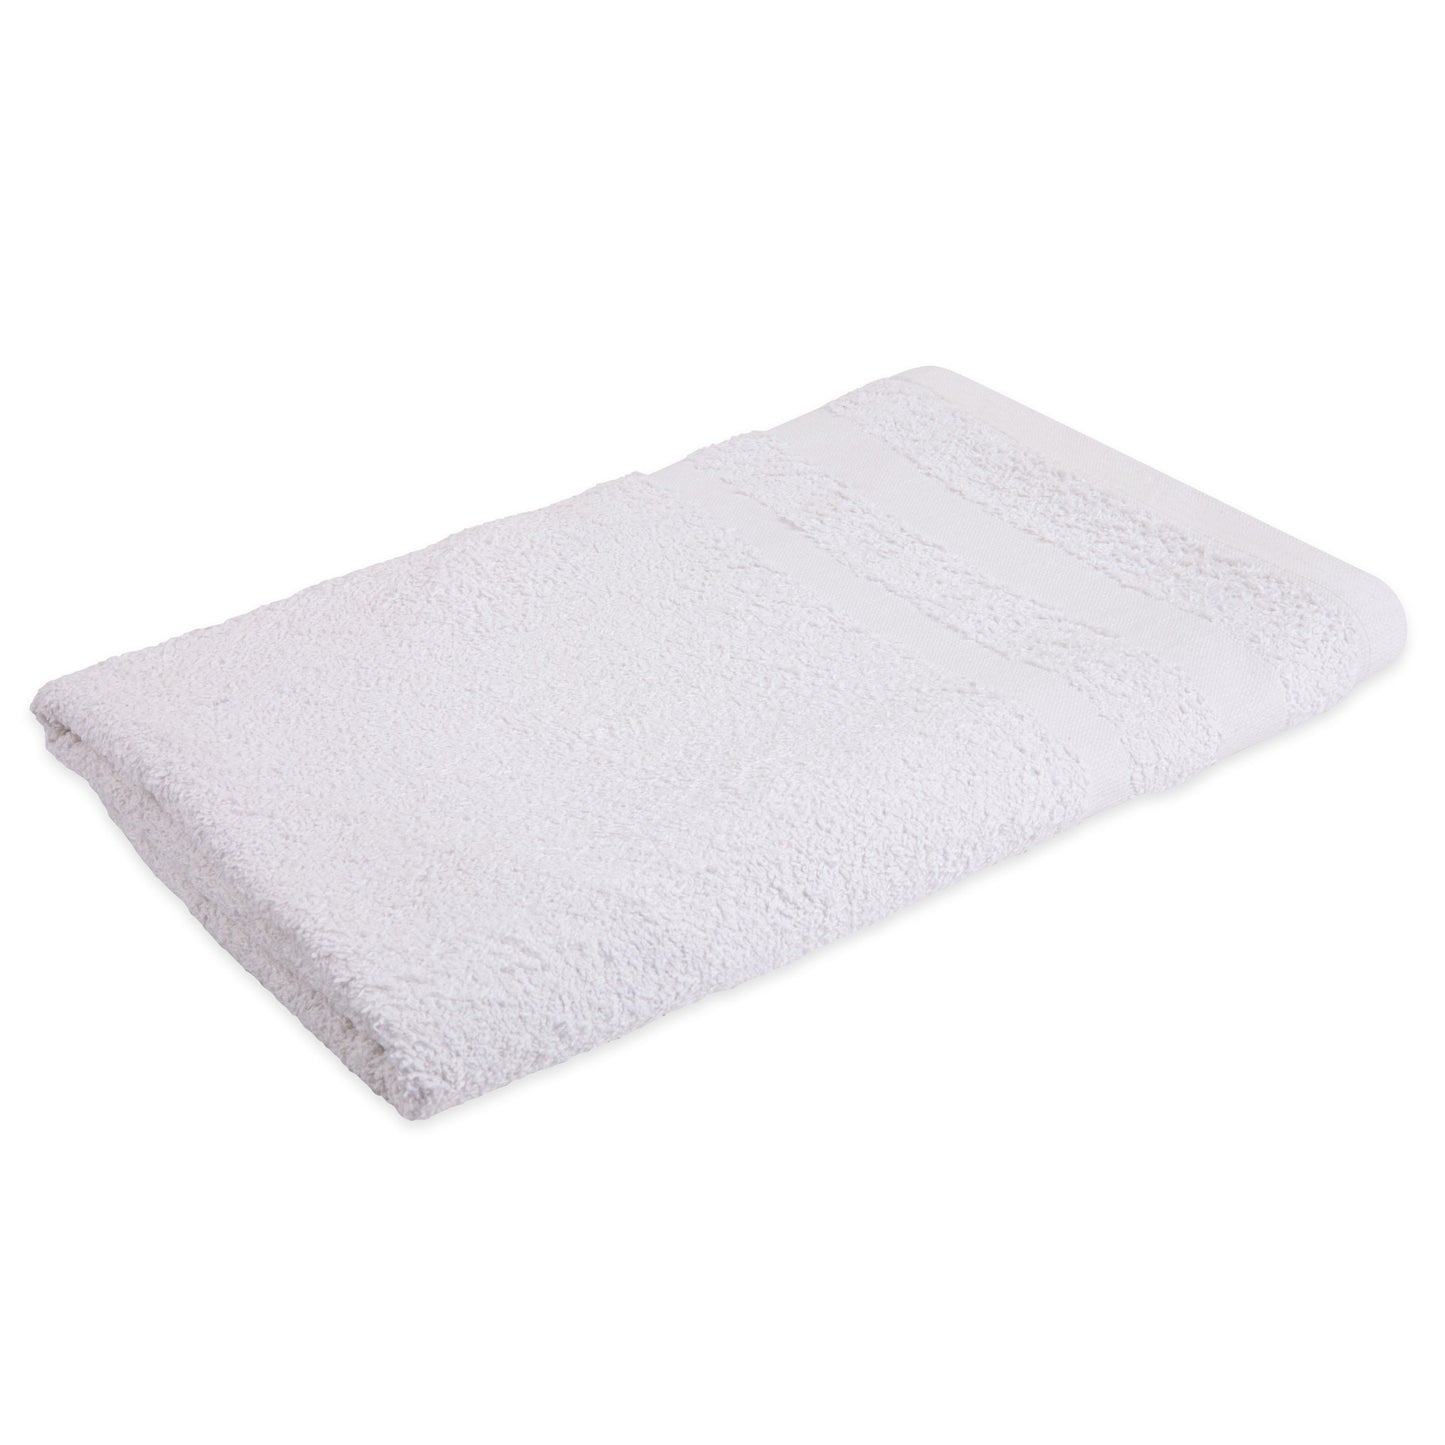 American Dawn | 24X50 Inch White With Double Cam Healthcare Towel | Terry Towel